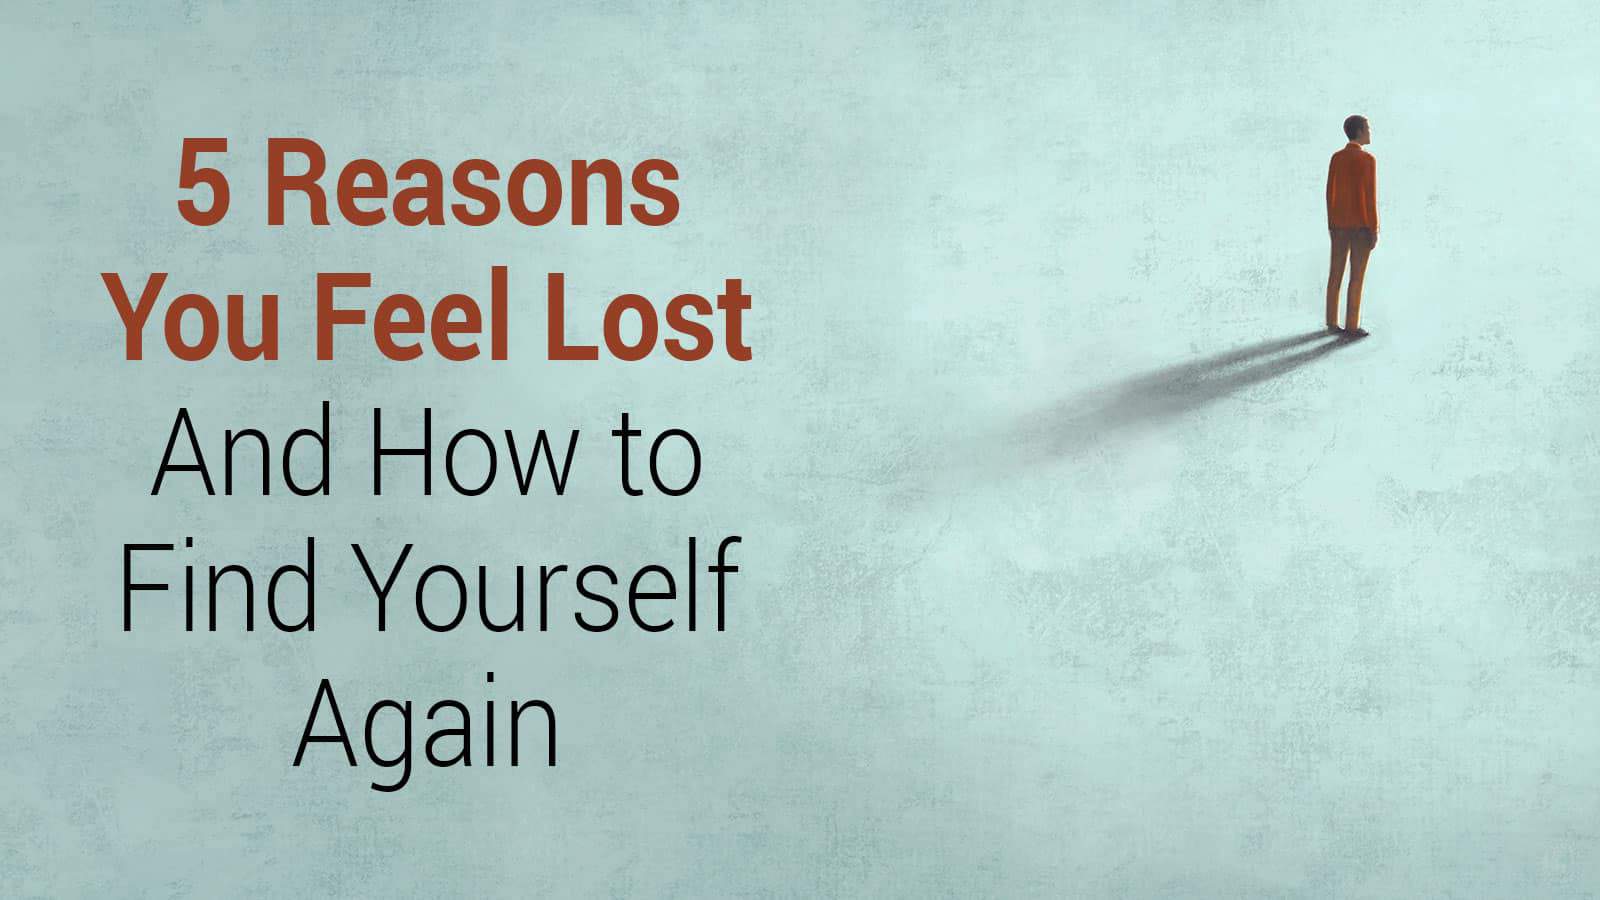 5 Reasons You Feel Lost (And How to Find Yourself Again)